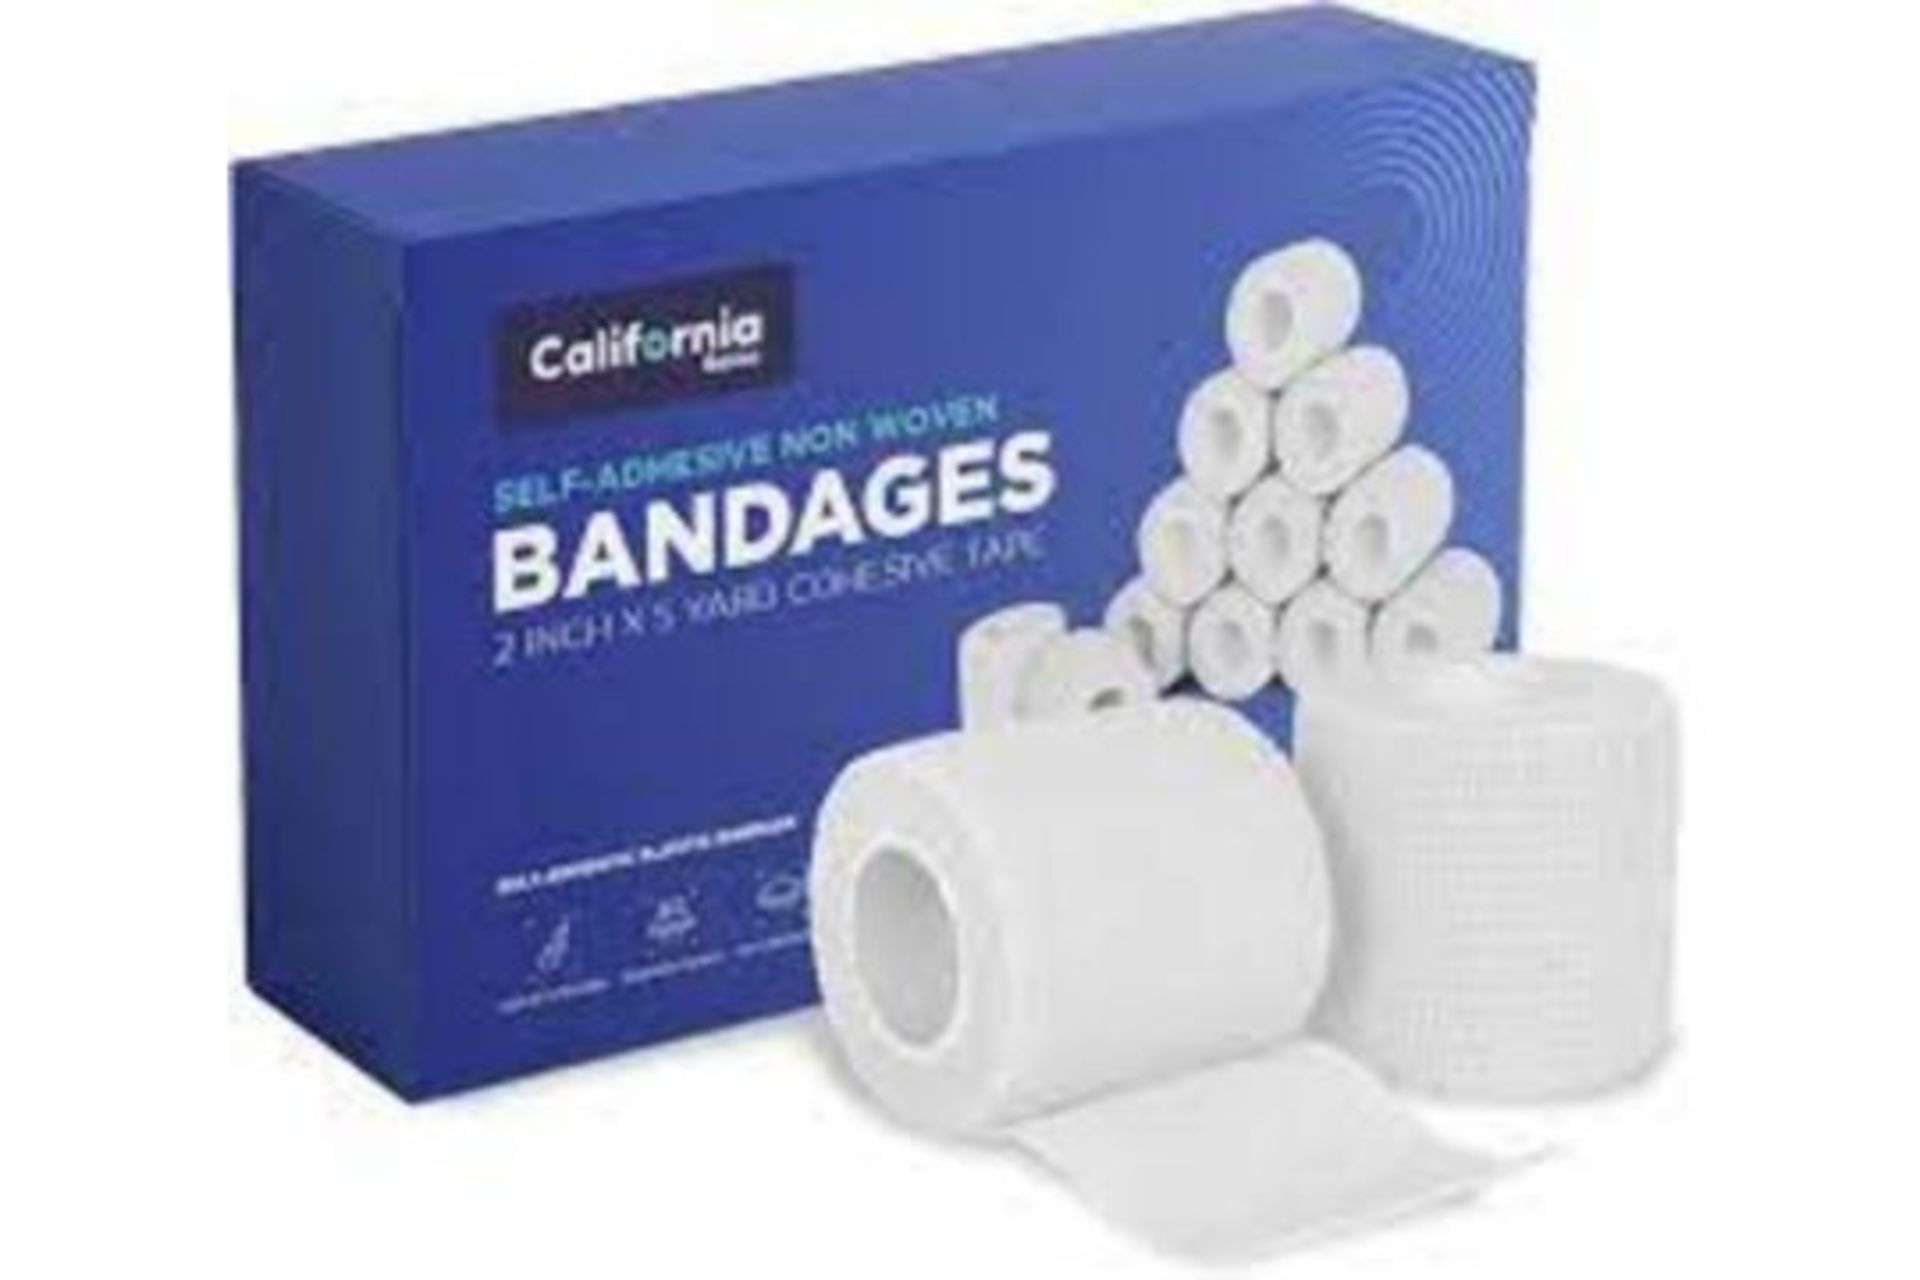 12 X BRAND NEW PACKS OF 24 CALIFORNIA SELF ADHESIVE NON WOVEN BANDAGES 2 INCH X 5 YARDS COHESIVE